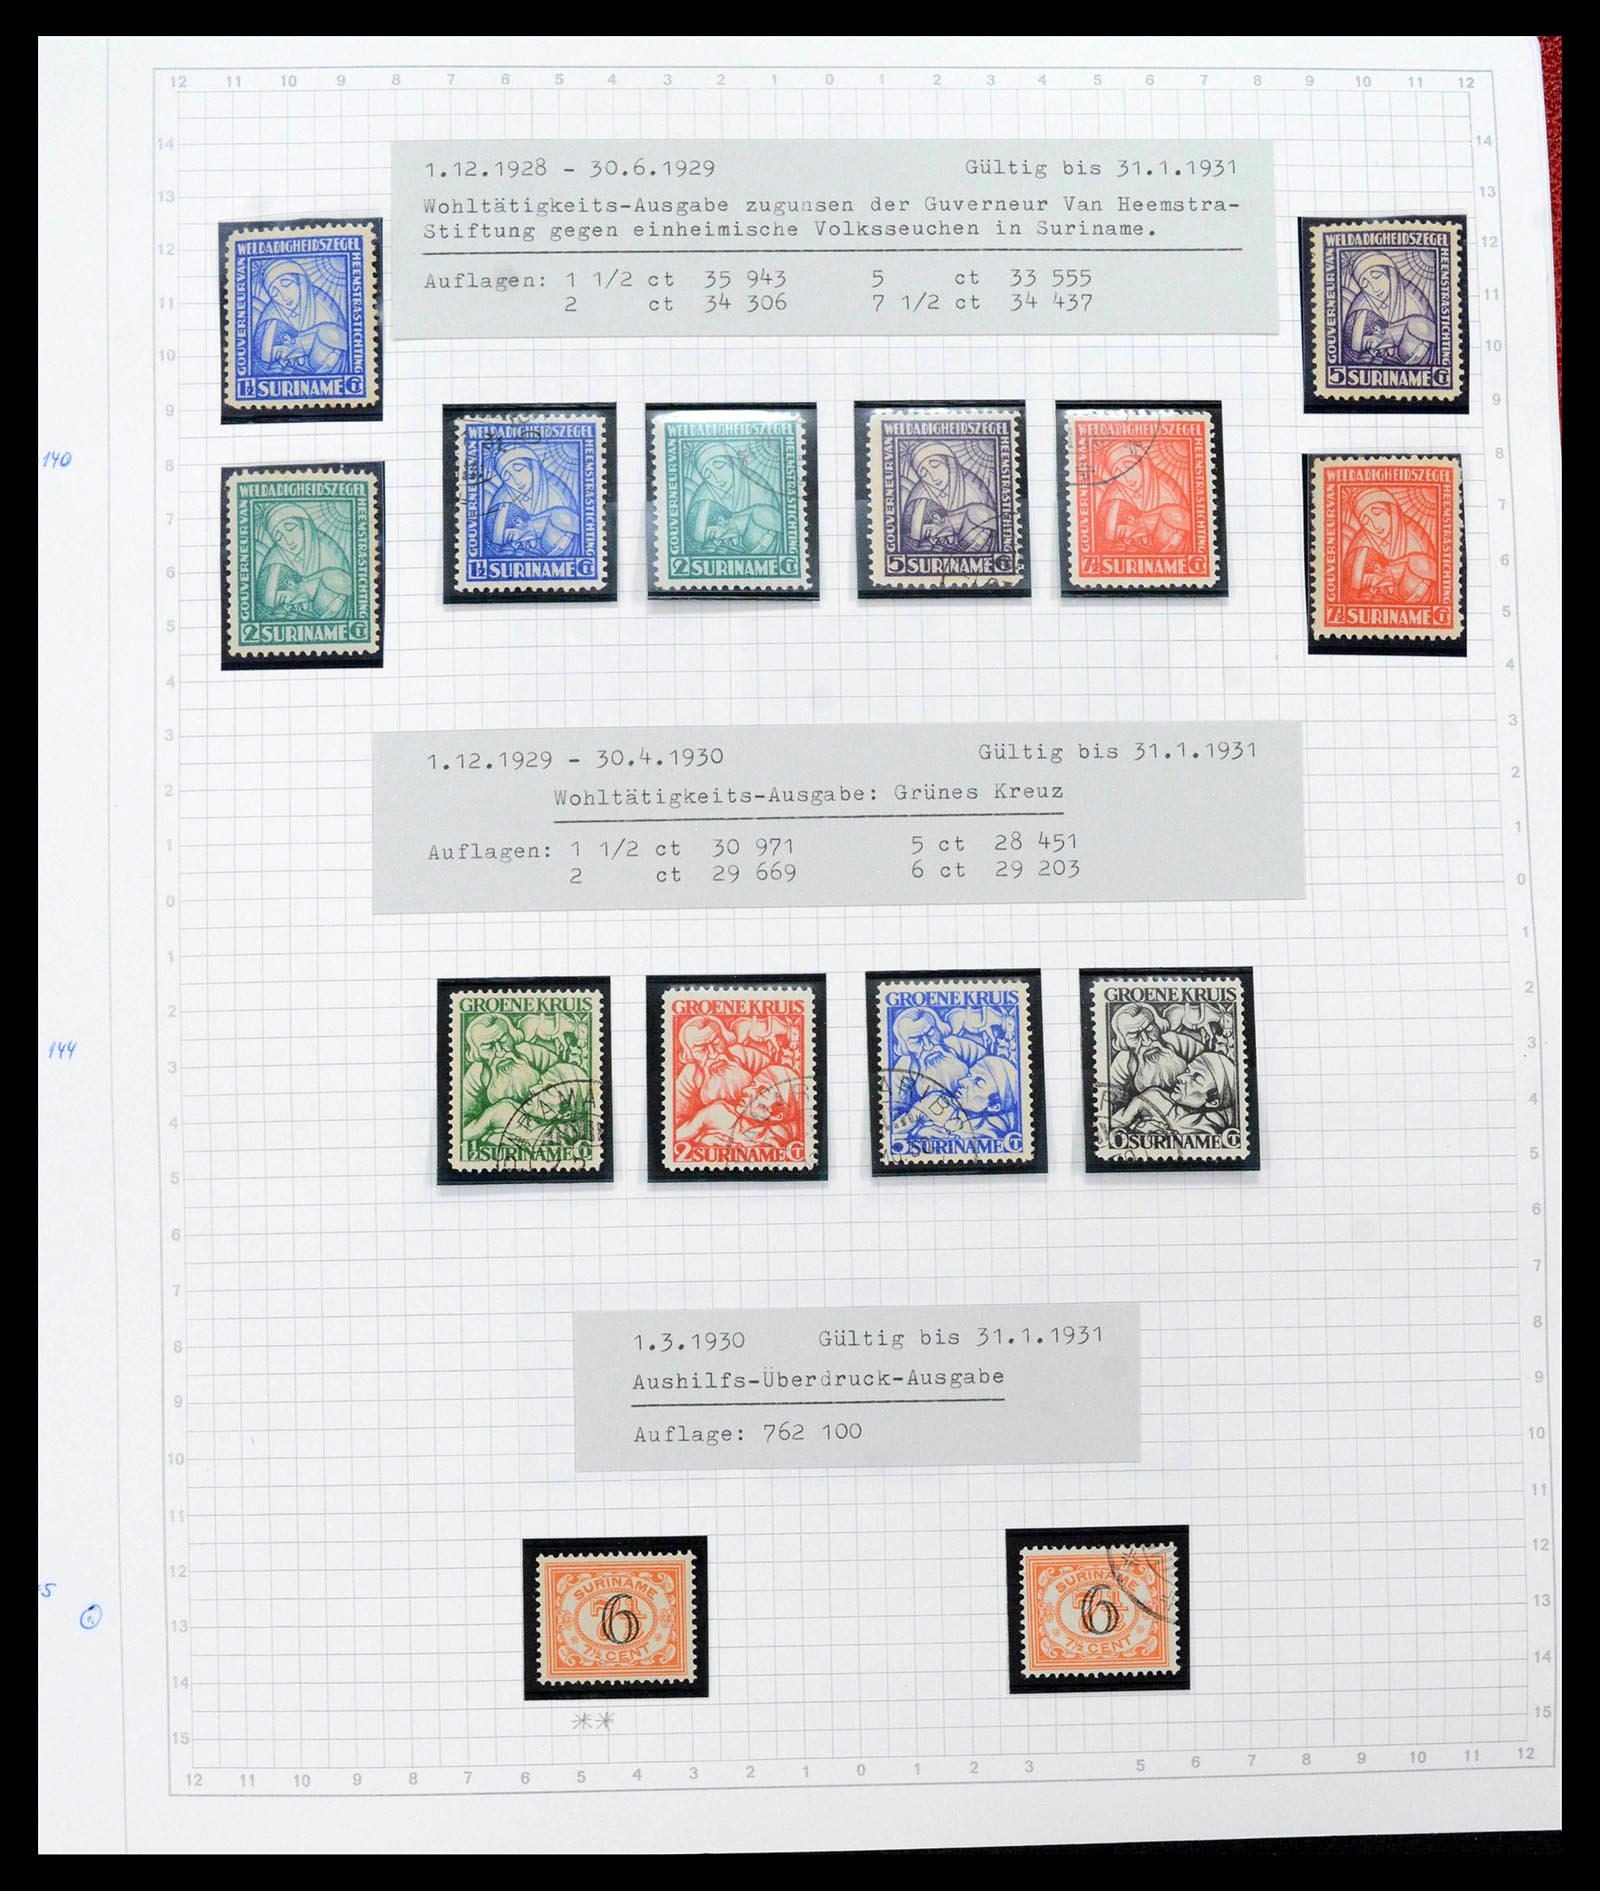 39373 0014 - Stamp collection 39373 Suriname 1873-1975.